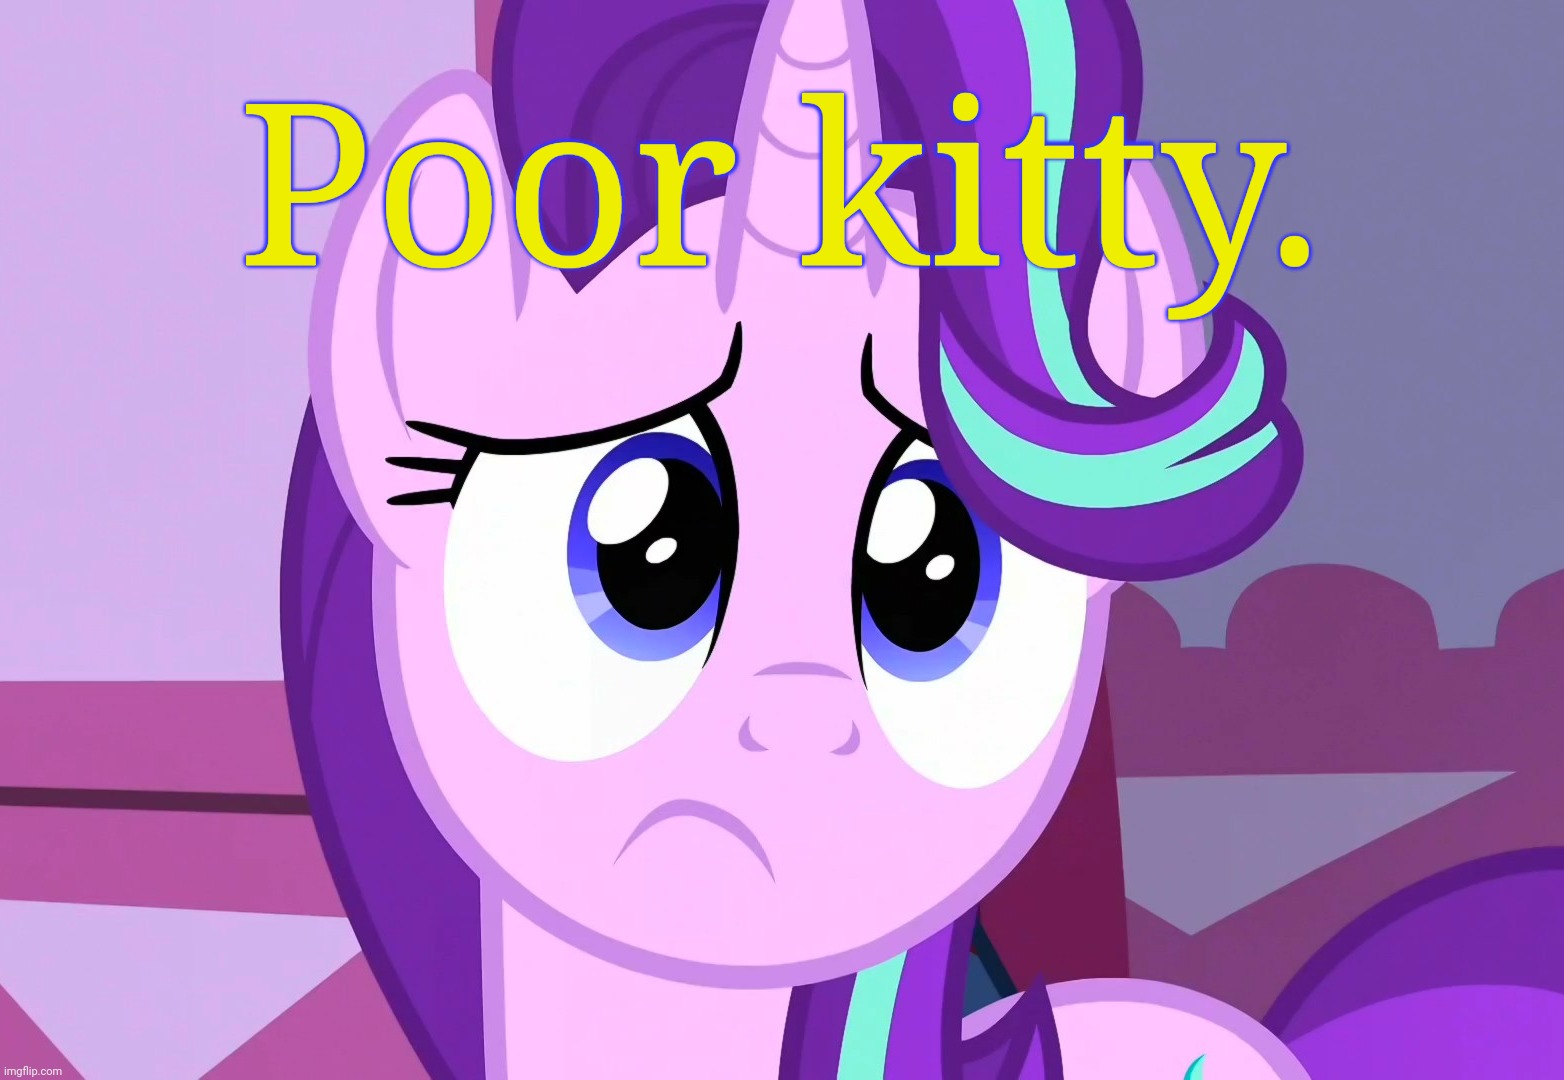 Sadlight Glimmer (MLP) | Poor kitty. | image tagged in sadlight glimmer mlp | made w/ Imgflip meme maker